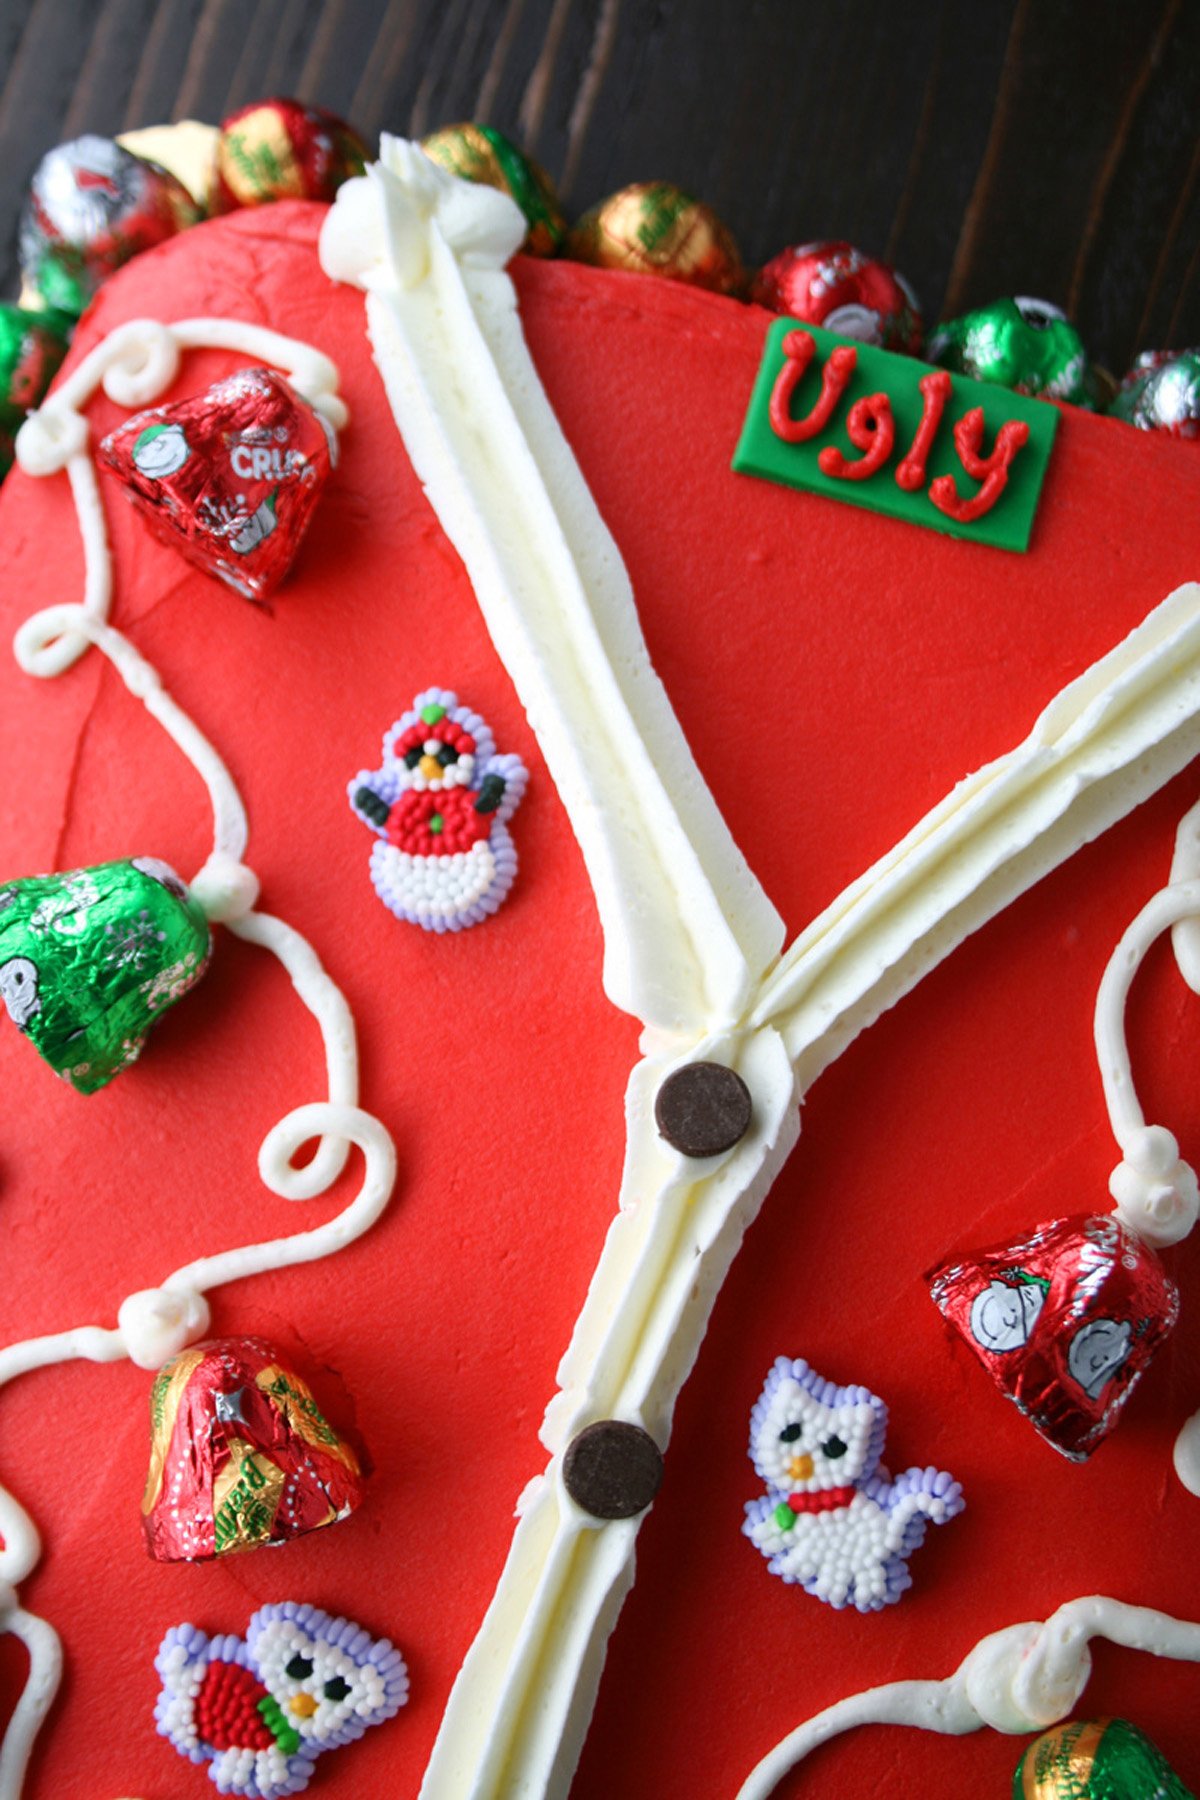 Ugly sweater cake with candy.